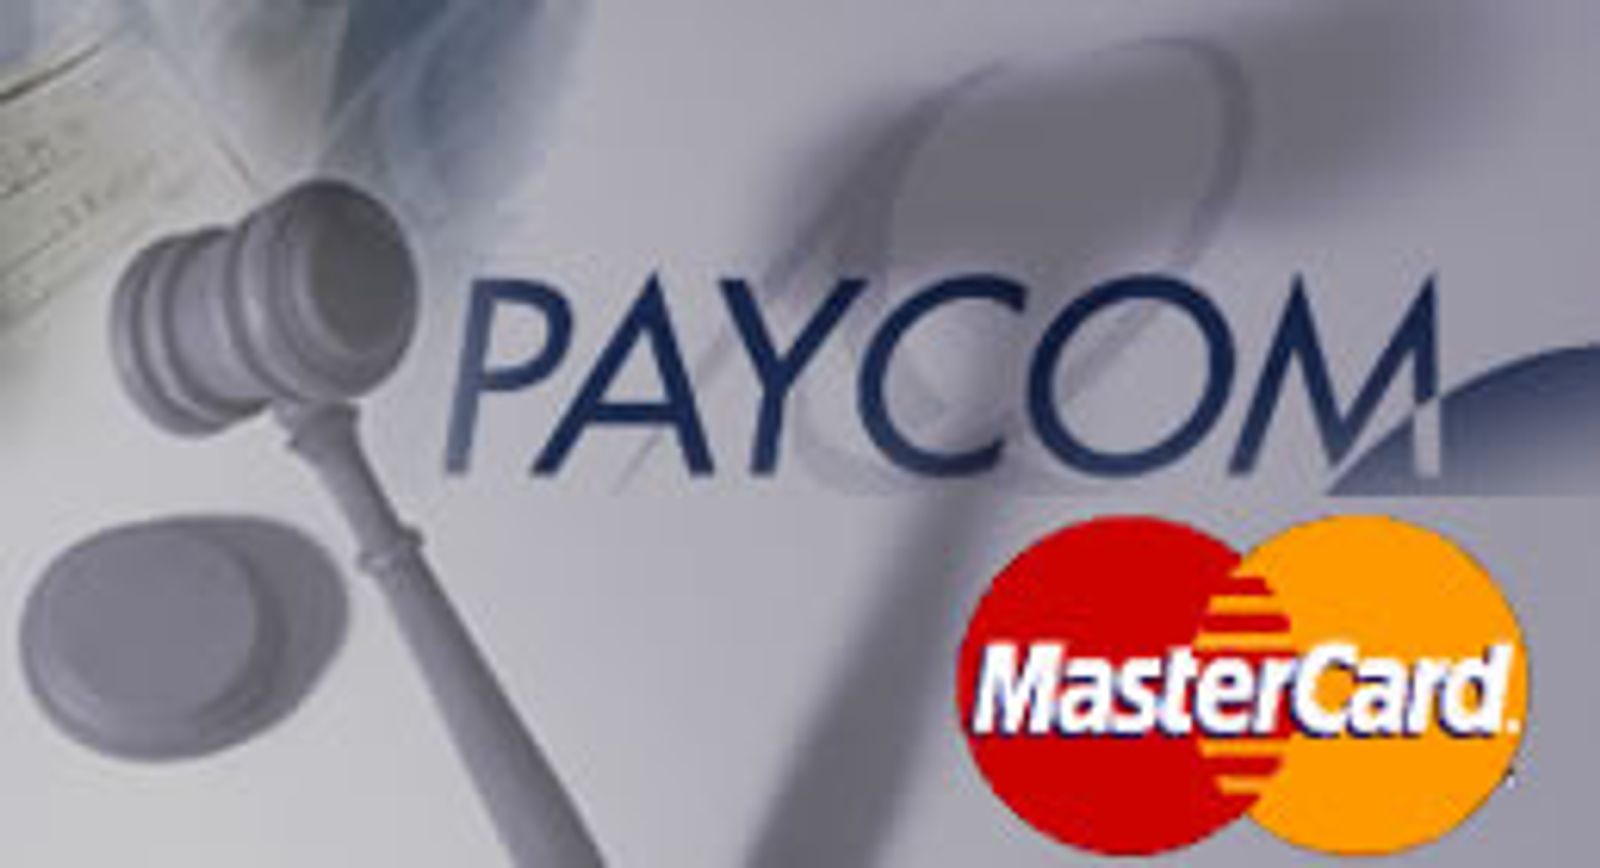 MasterCard: Paycom Trying To Duck Compliance